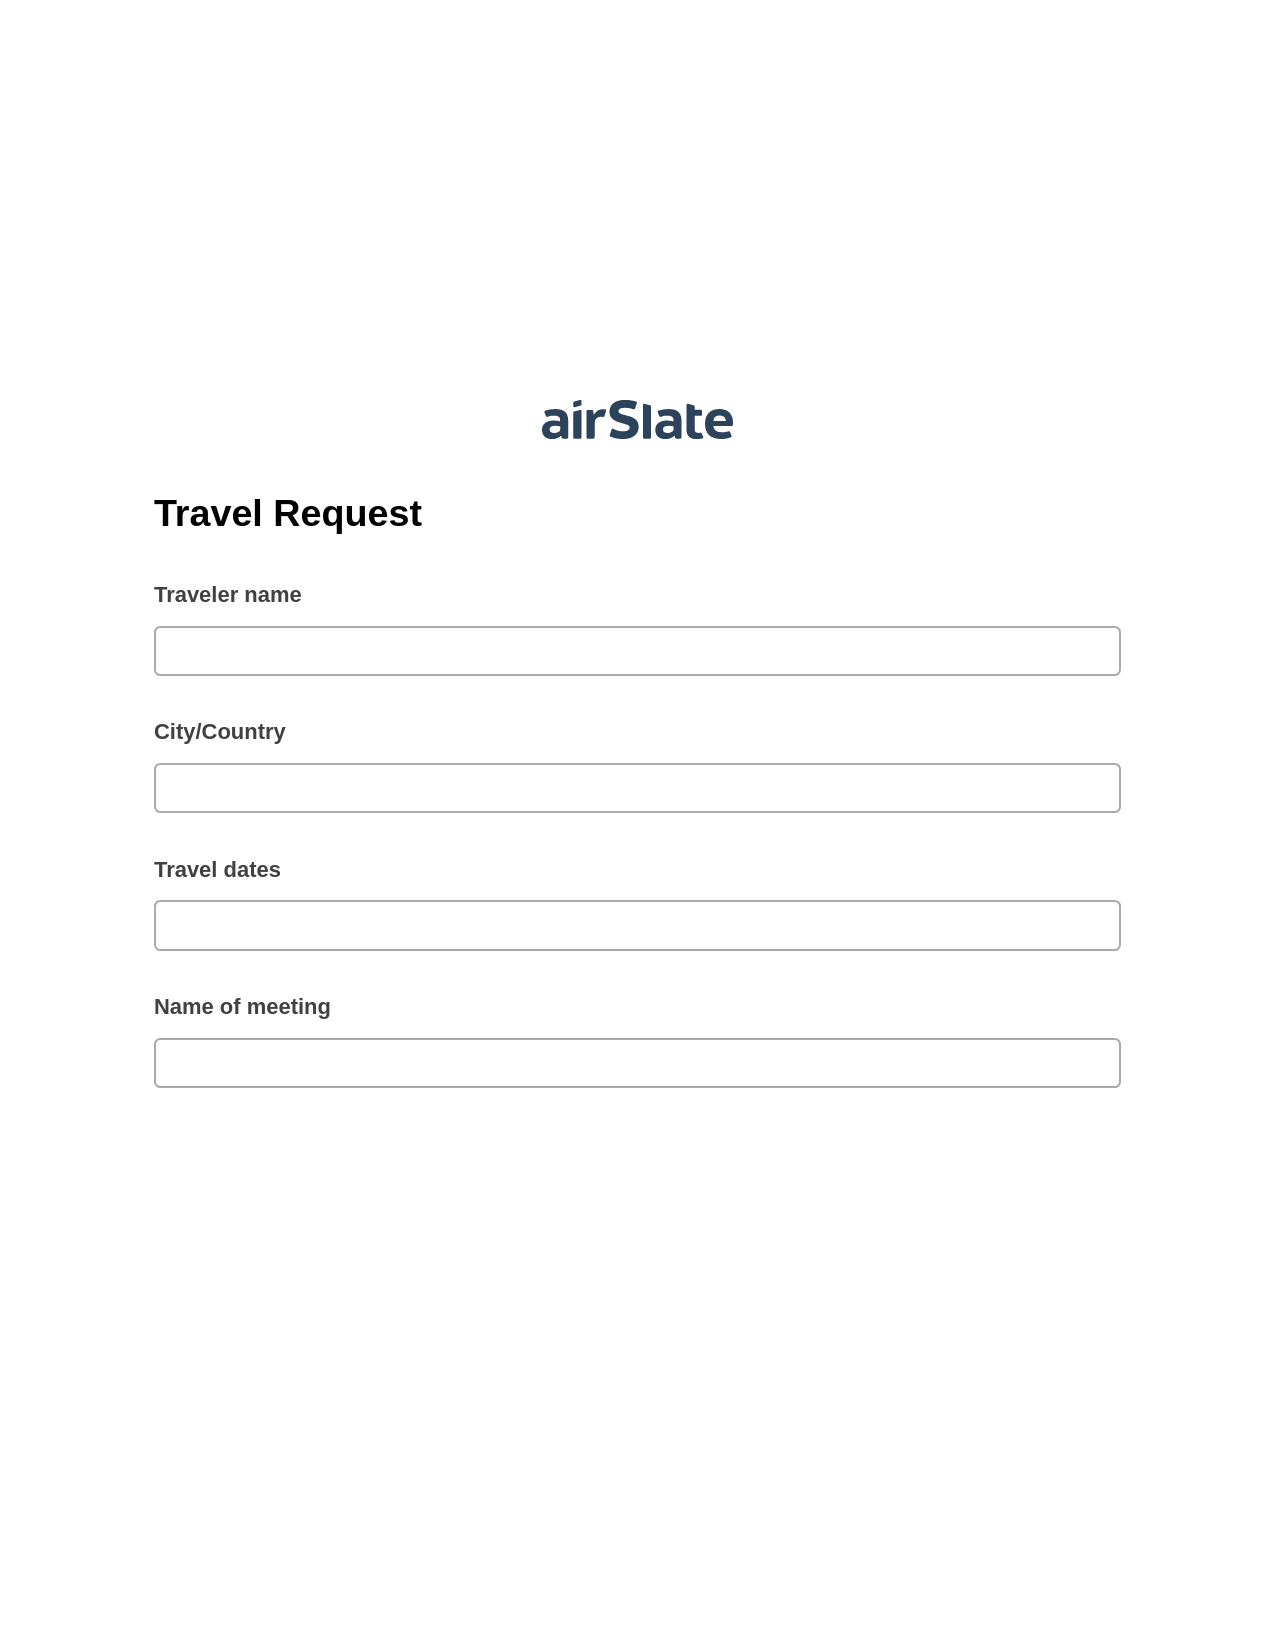 Travel Request Pre-fill Slate from MS Dynamics 365 Records Bot, Export to MS Dynamics 365 Bot, Export to Google Sheet Bot